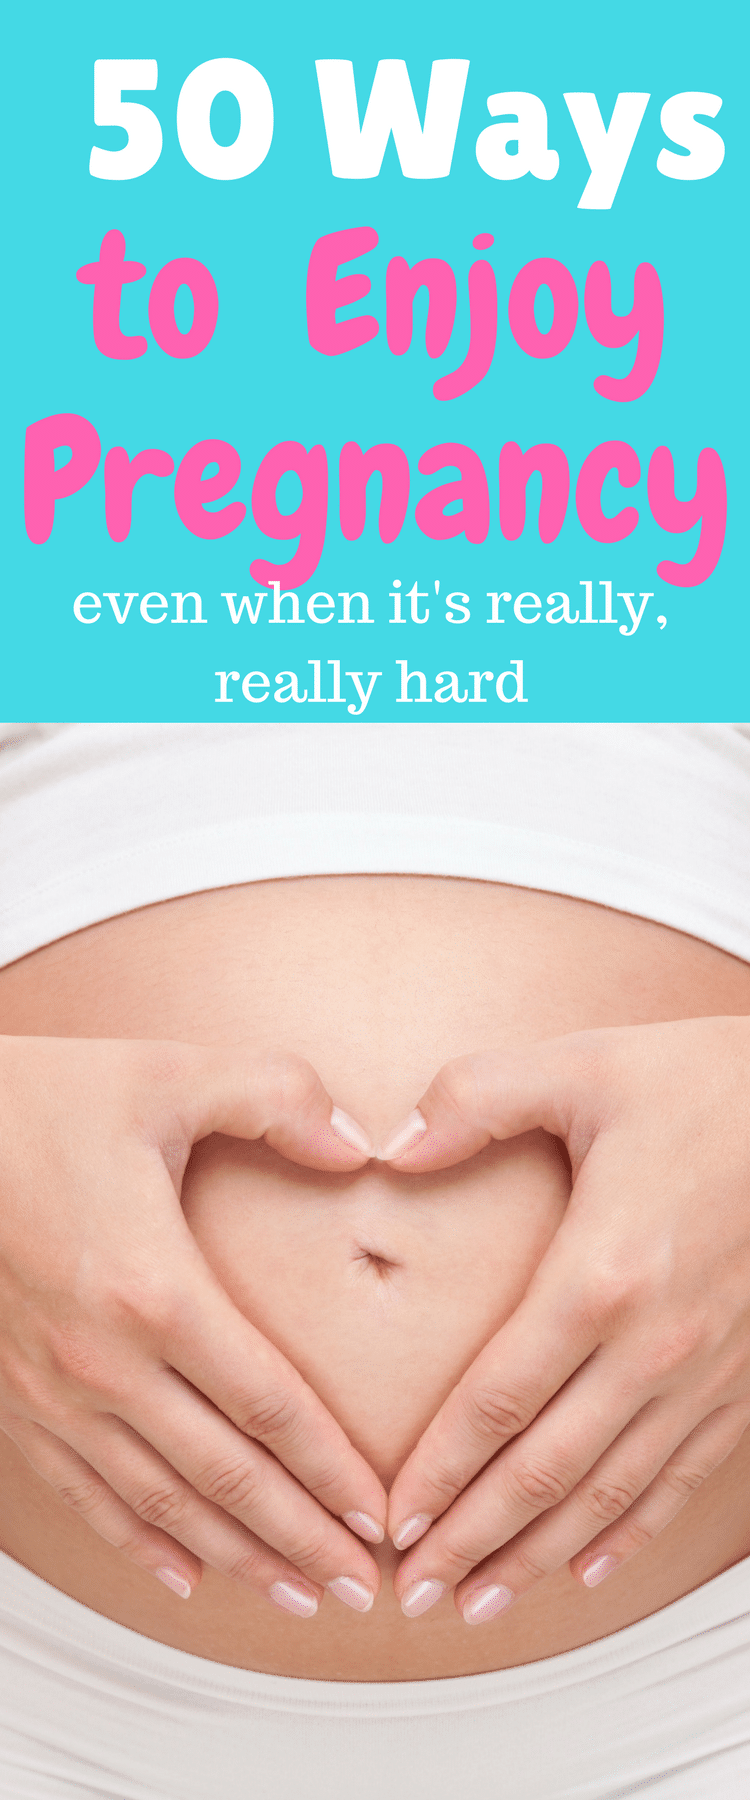 Whether it's your first pregnancy or second pregnancy, early pregnancy, or you are past your first trimester, here are 50 ways to enjoy pregnancy